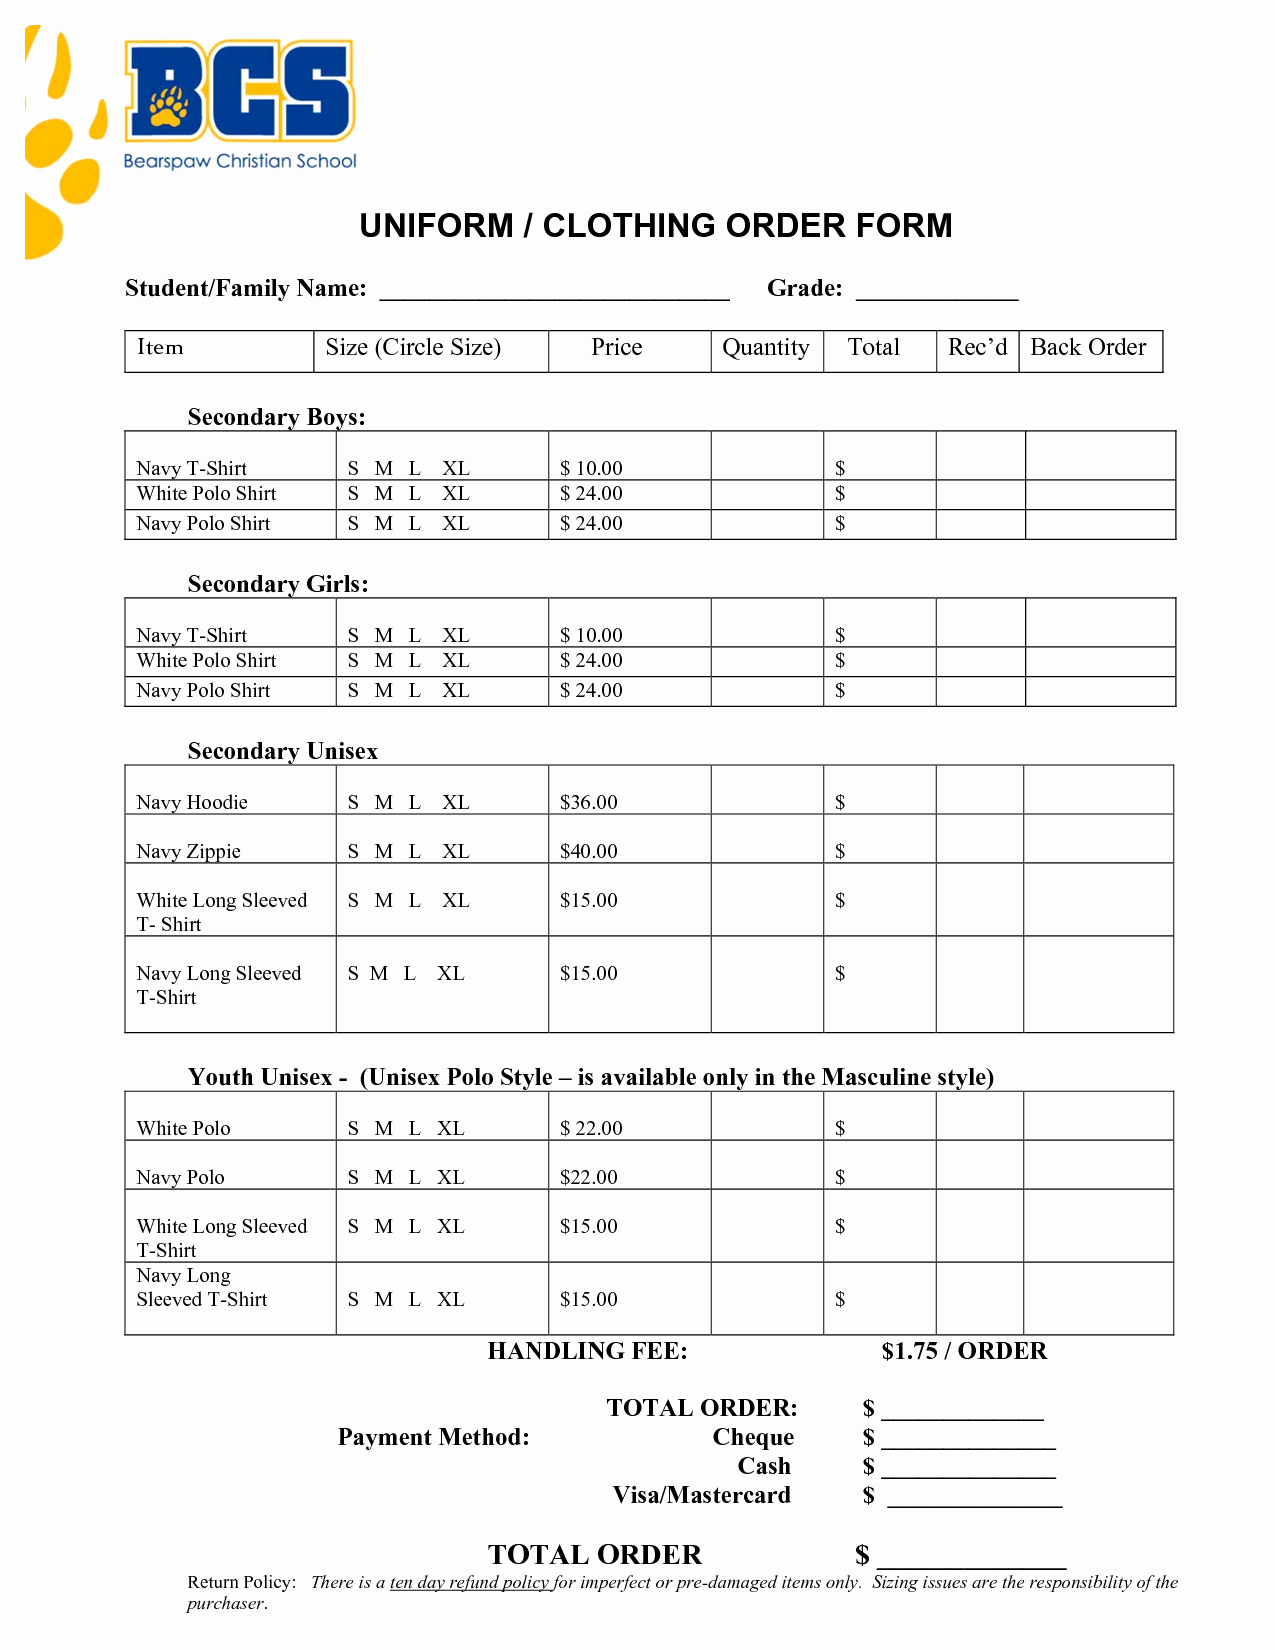 Clothing order form Template Best Of Maths Phobia Causes and Reme S Essay 1200 Words Double Spaced Freshest Problems